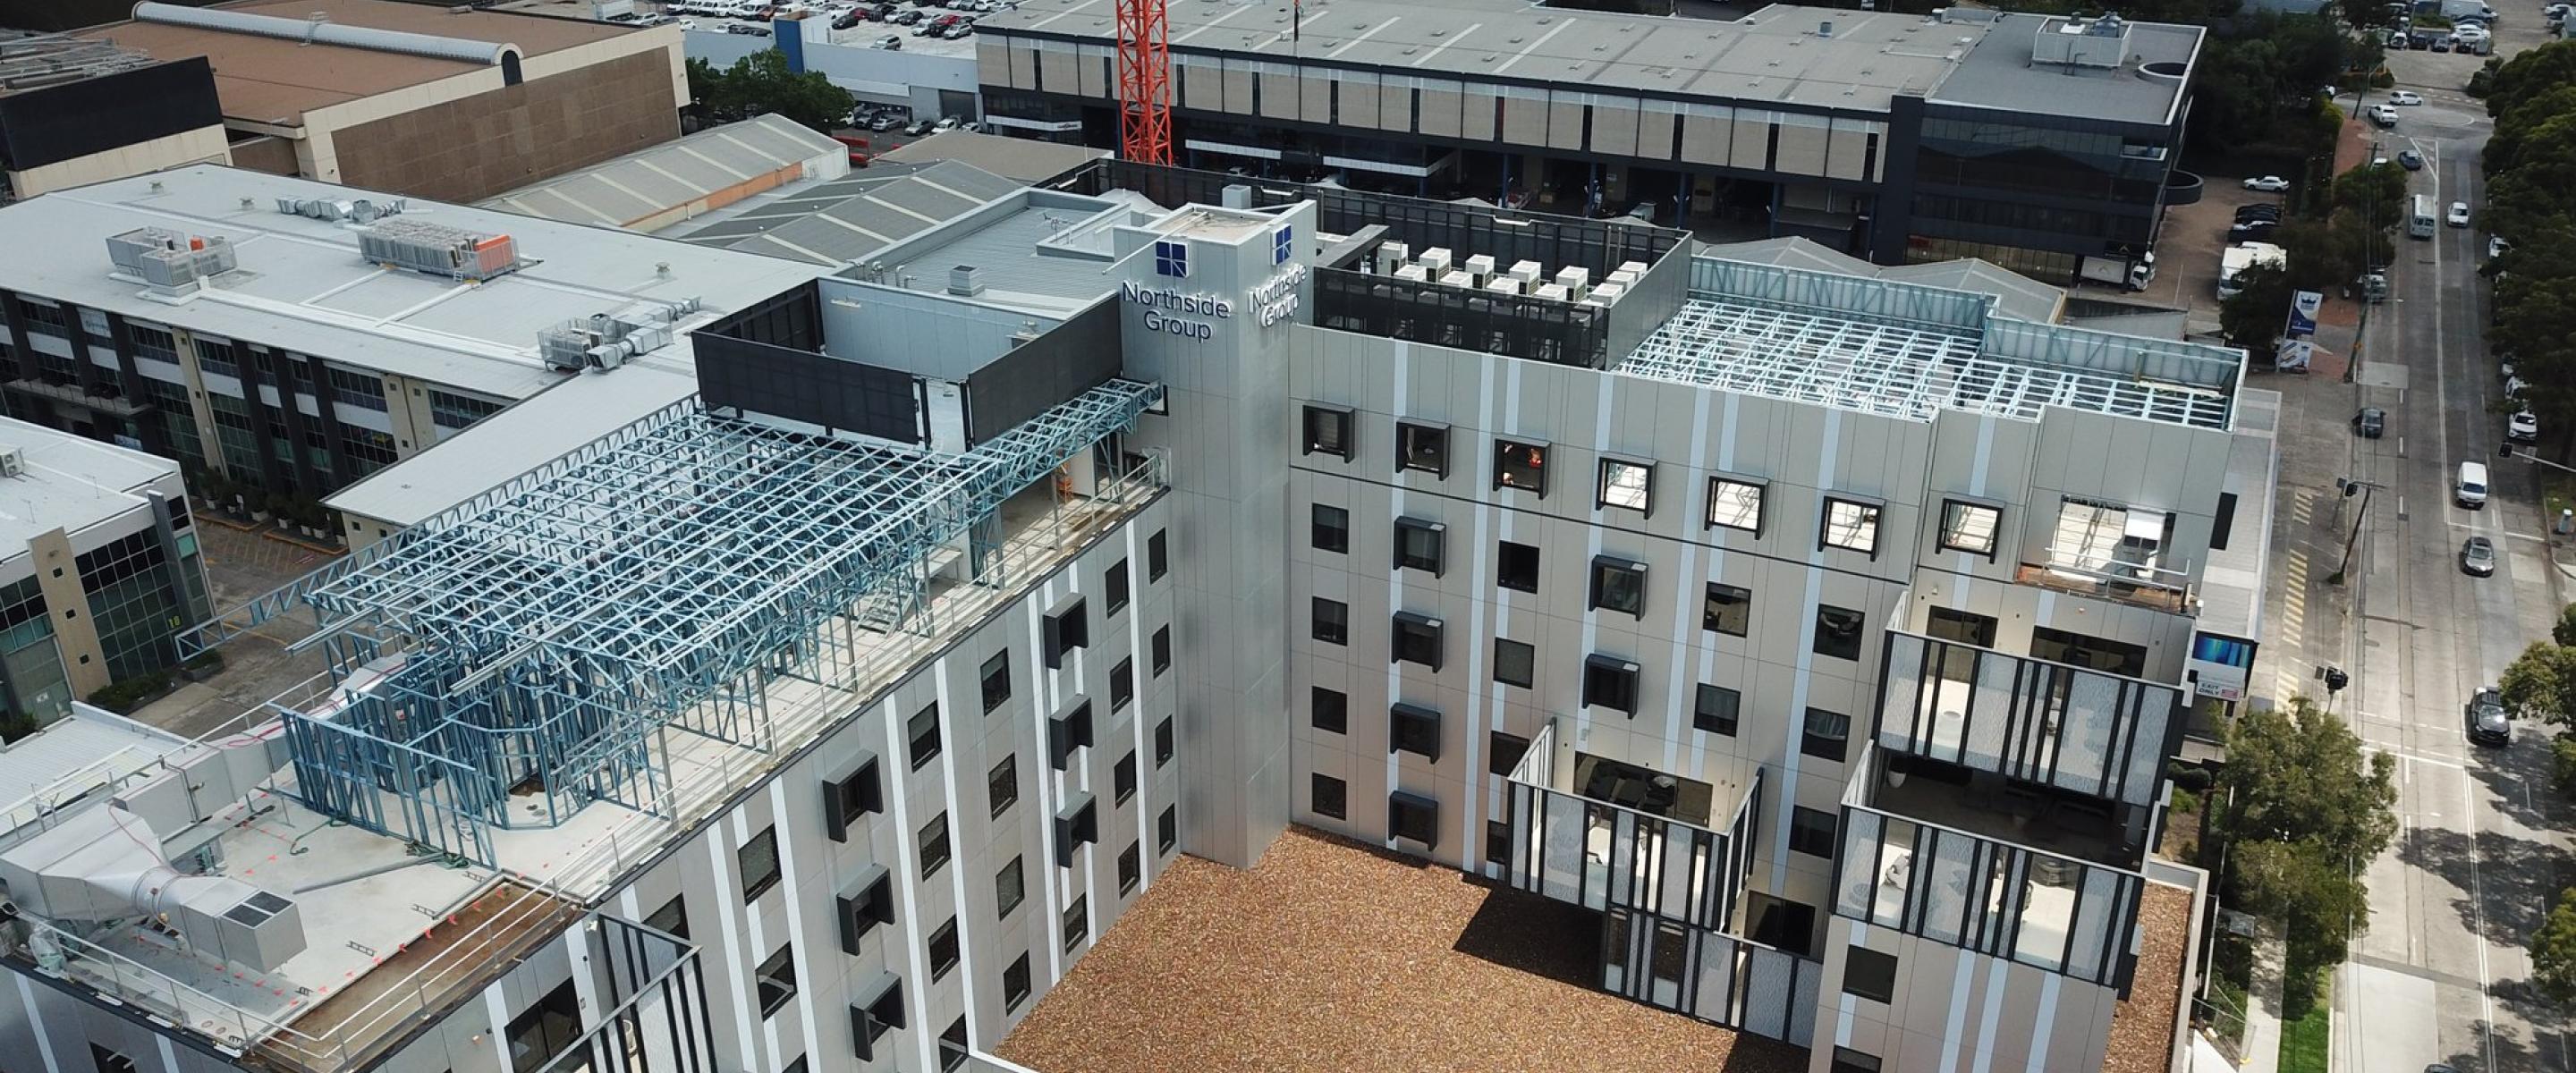 Ramsay Clinic Northside - TRUECORE® steel - aerial shot - The eighth-floor extension was built with steel frames made from TRUECORE steel